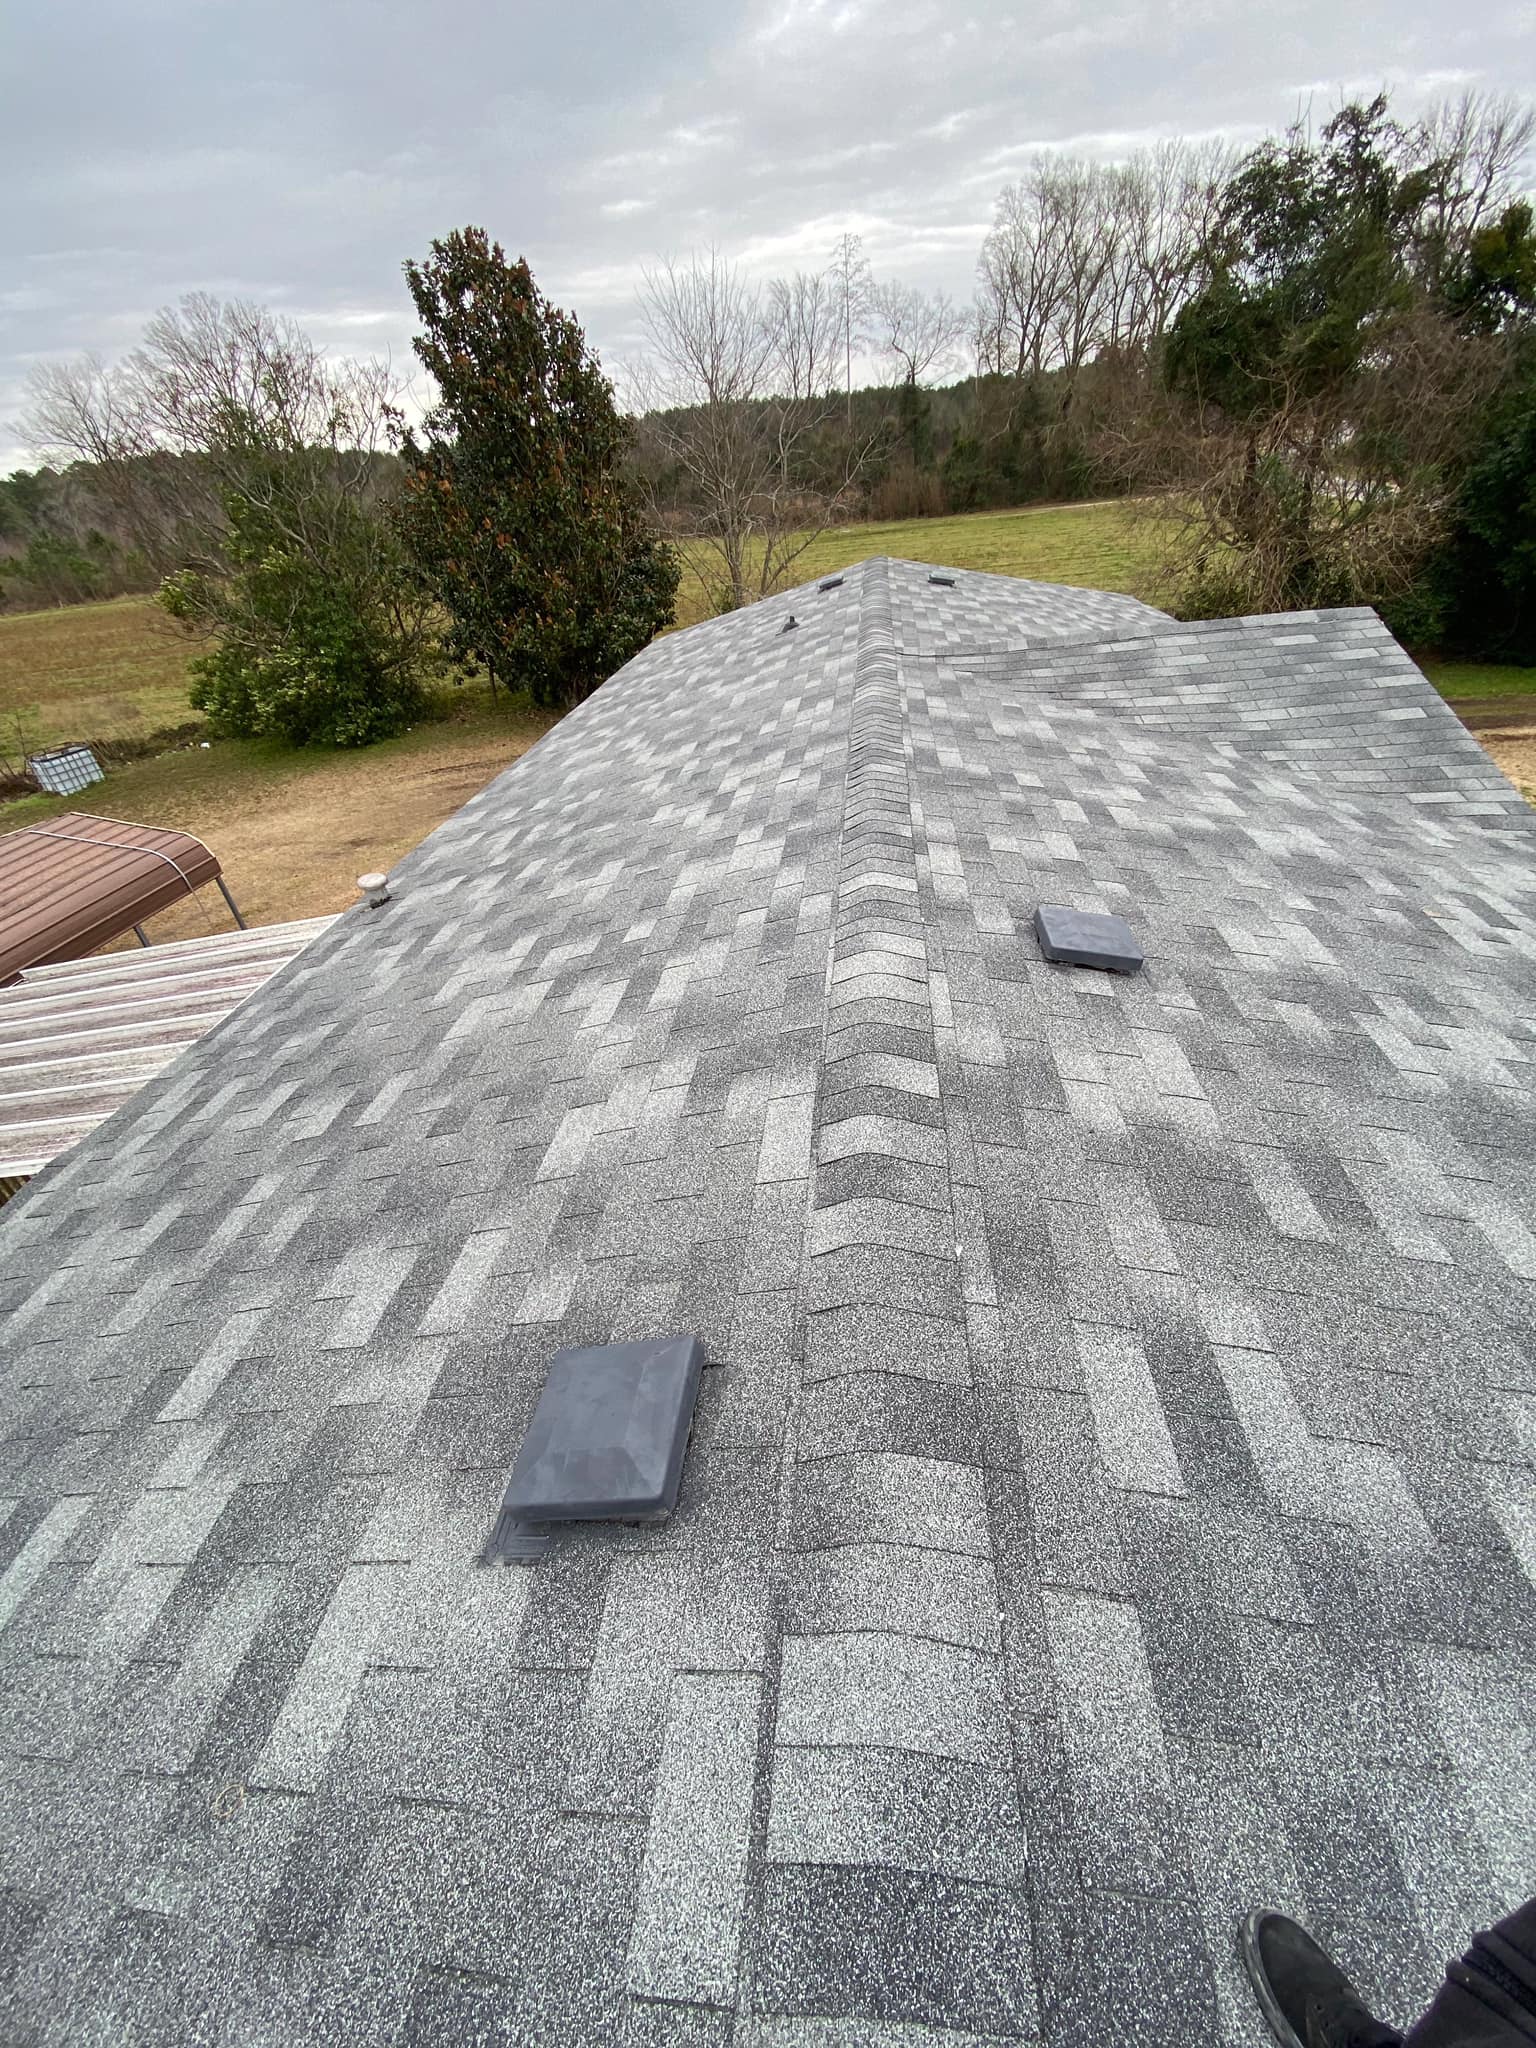 Five Star Roofing 3533 Faust St, Bamberg South Carolina 29003